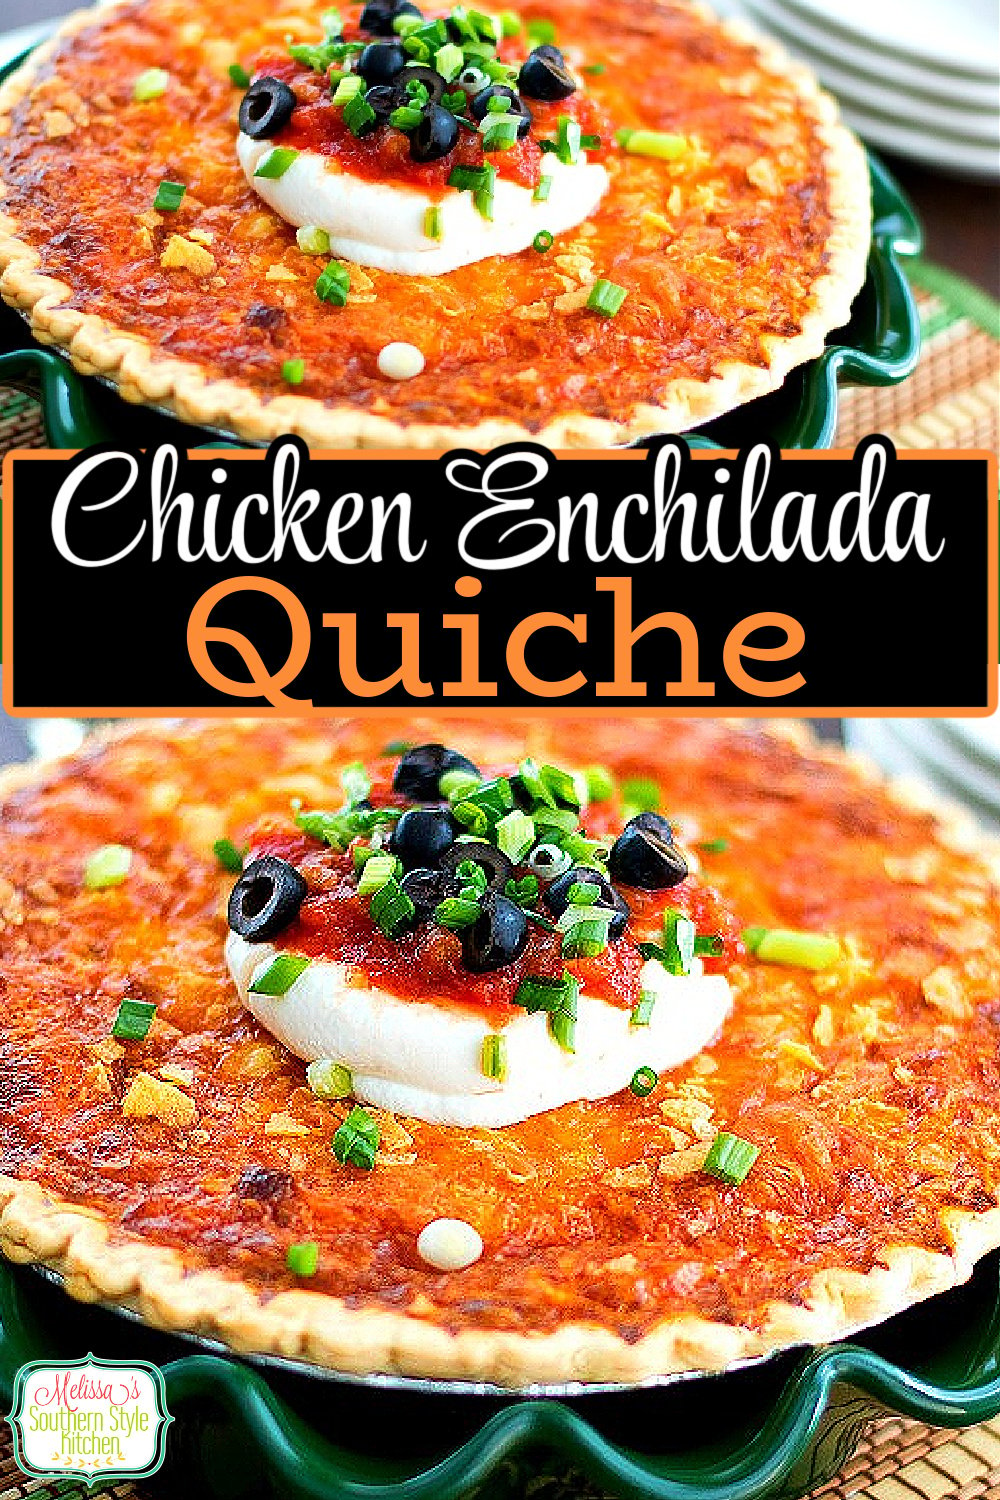 This easy Chicken Enchilada Quiche is a stellar option for a meal any time of day. #quicherecipes #easychickenrecipes #chickenenchiladas #chickenquiche #quiche #chickenrecipes #brunch #breakfast #southernrecipes via @melissasssk